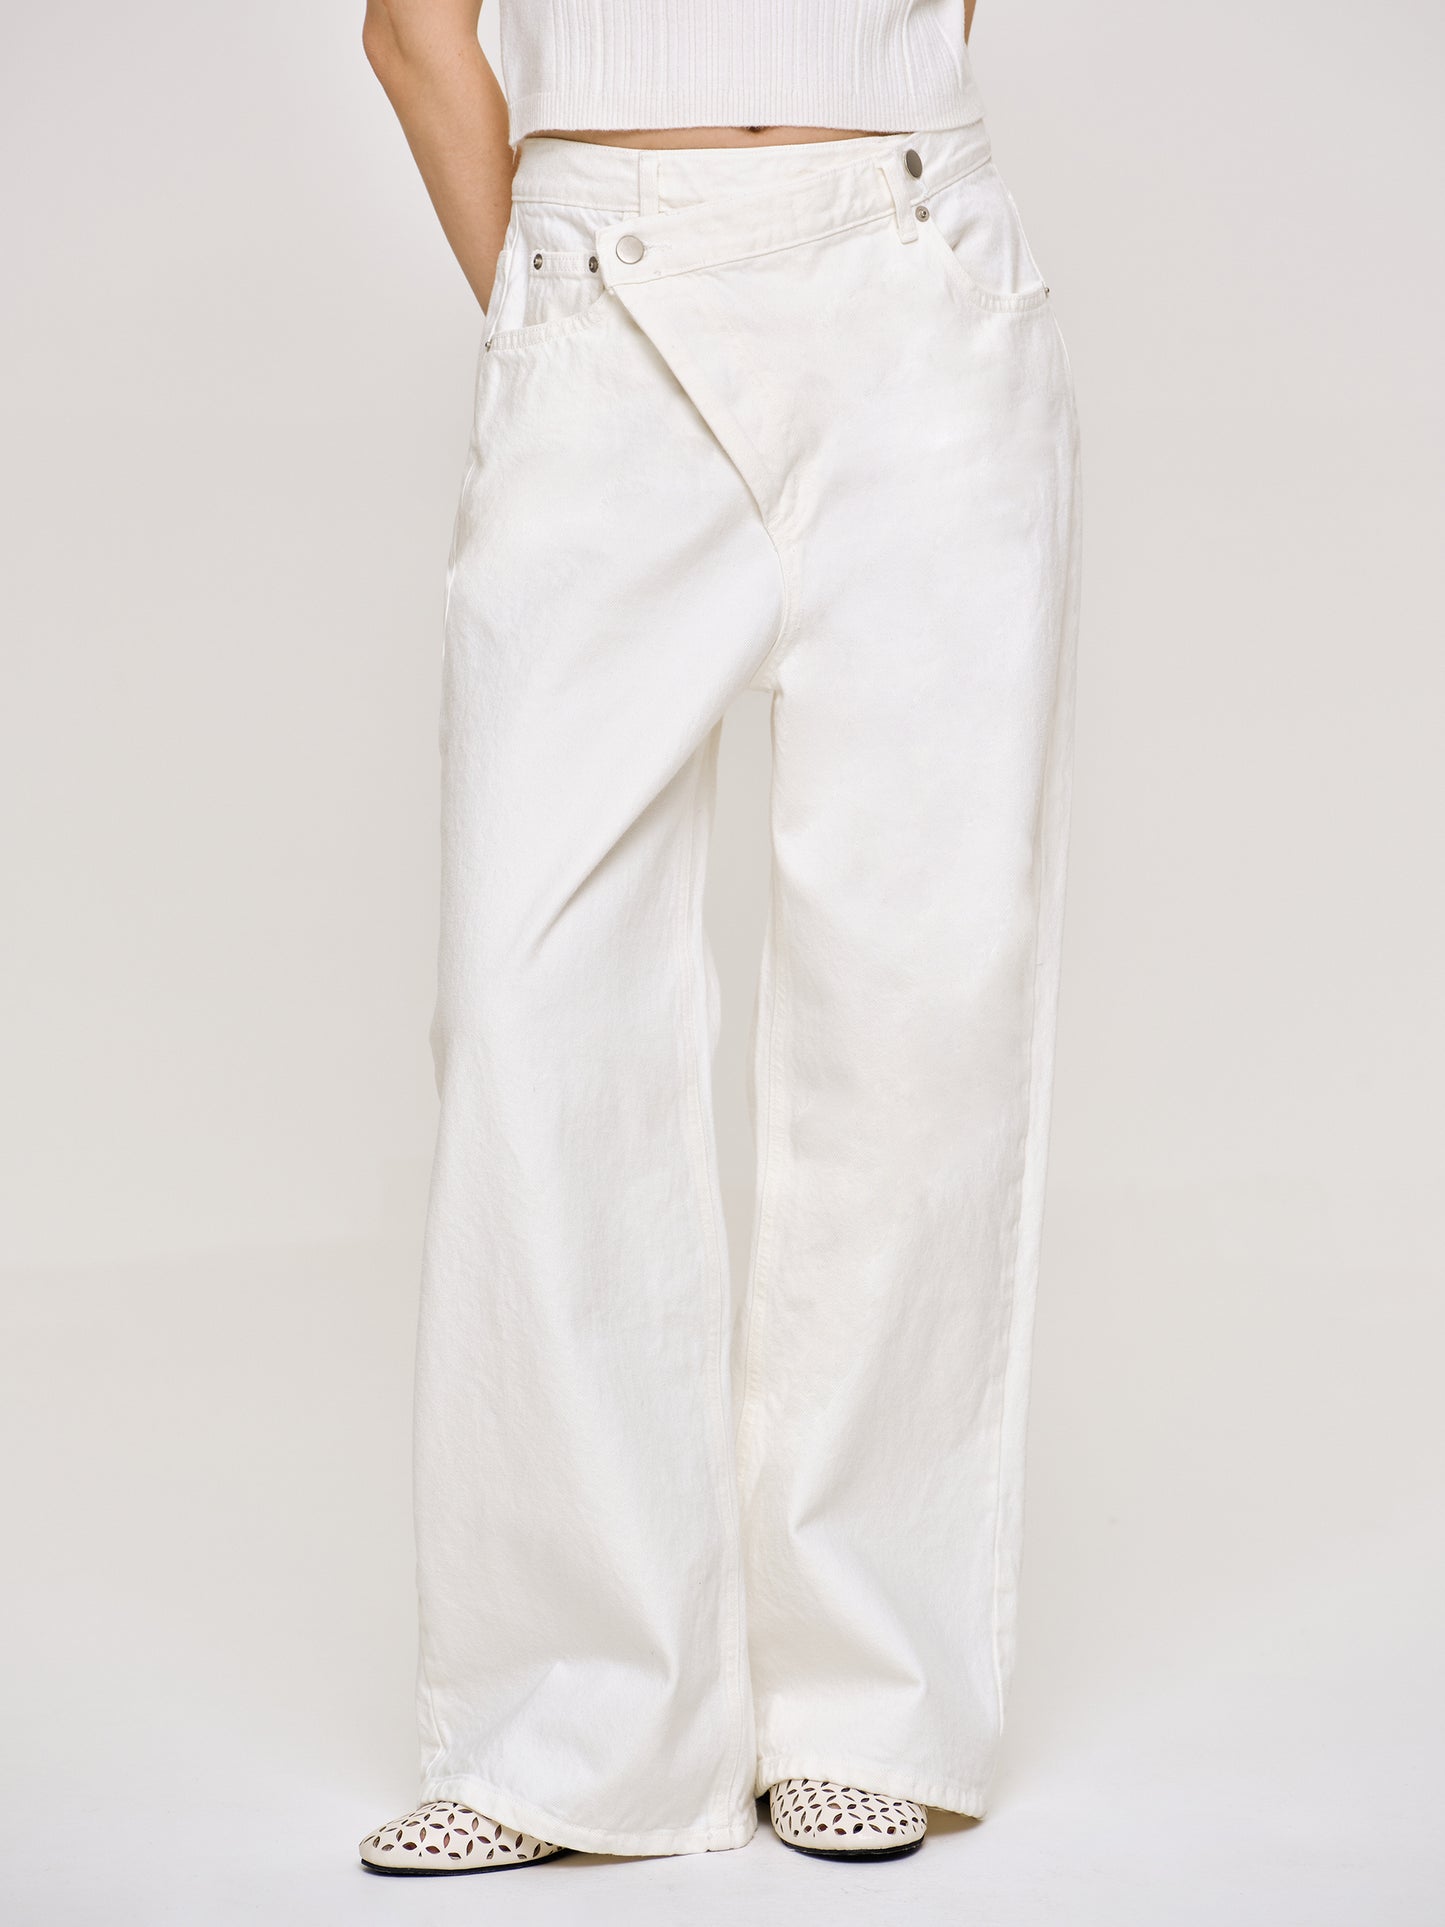 Crossover Jeans, White